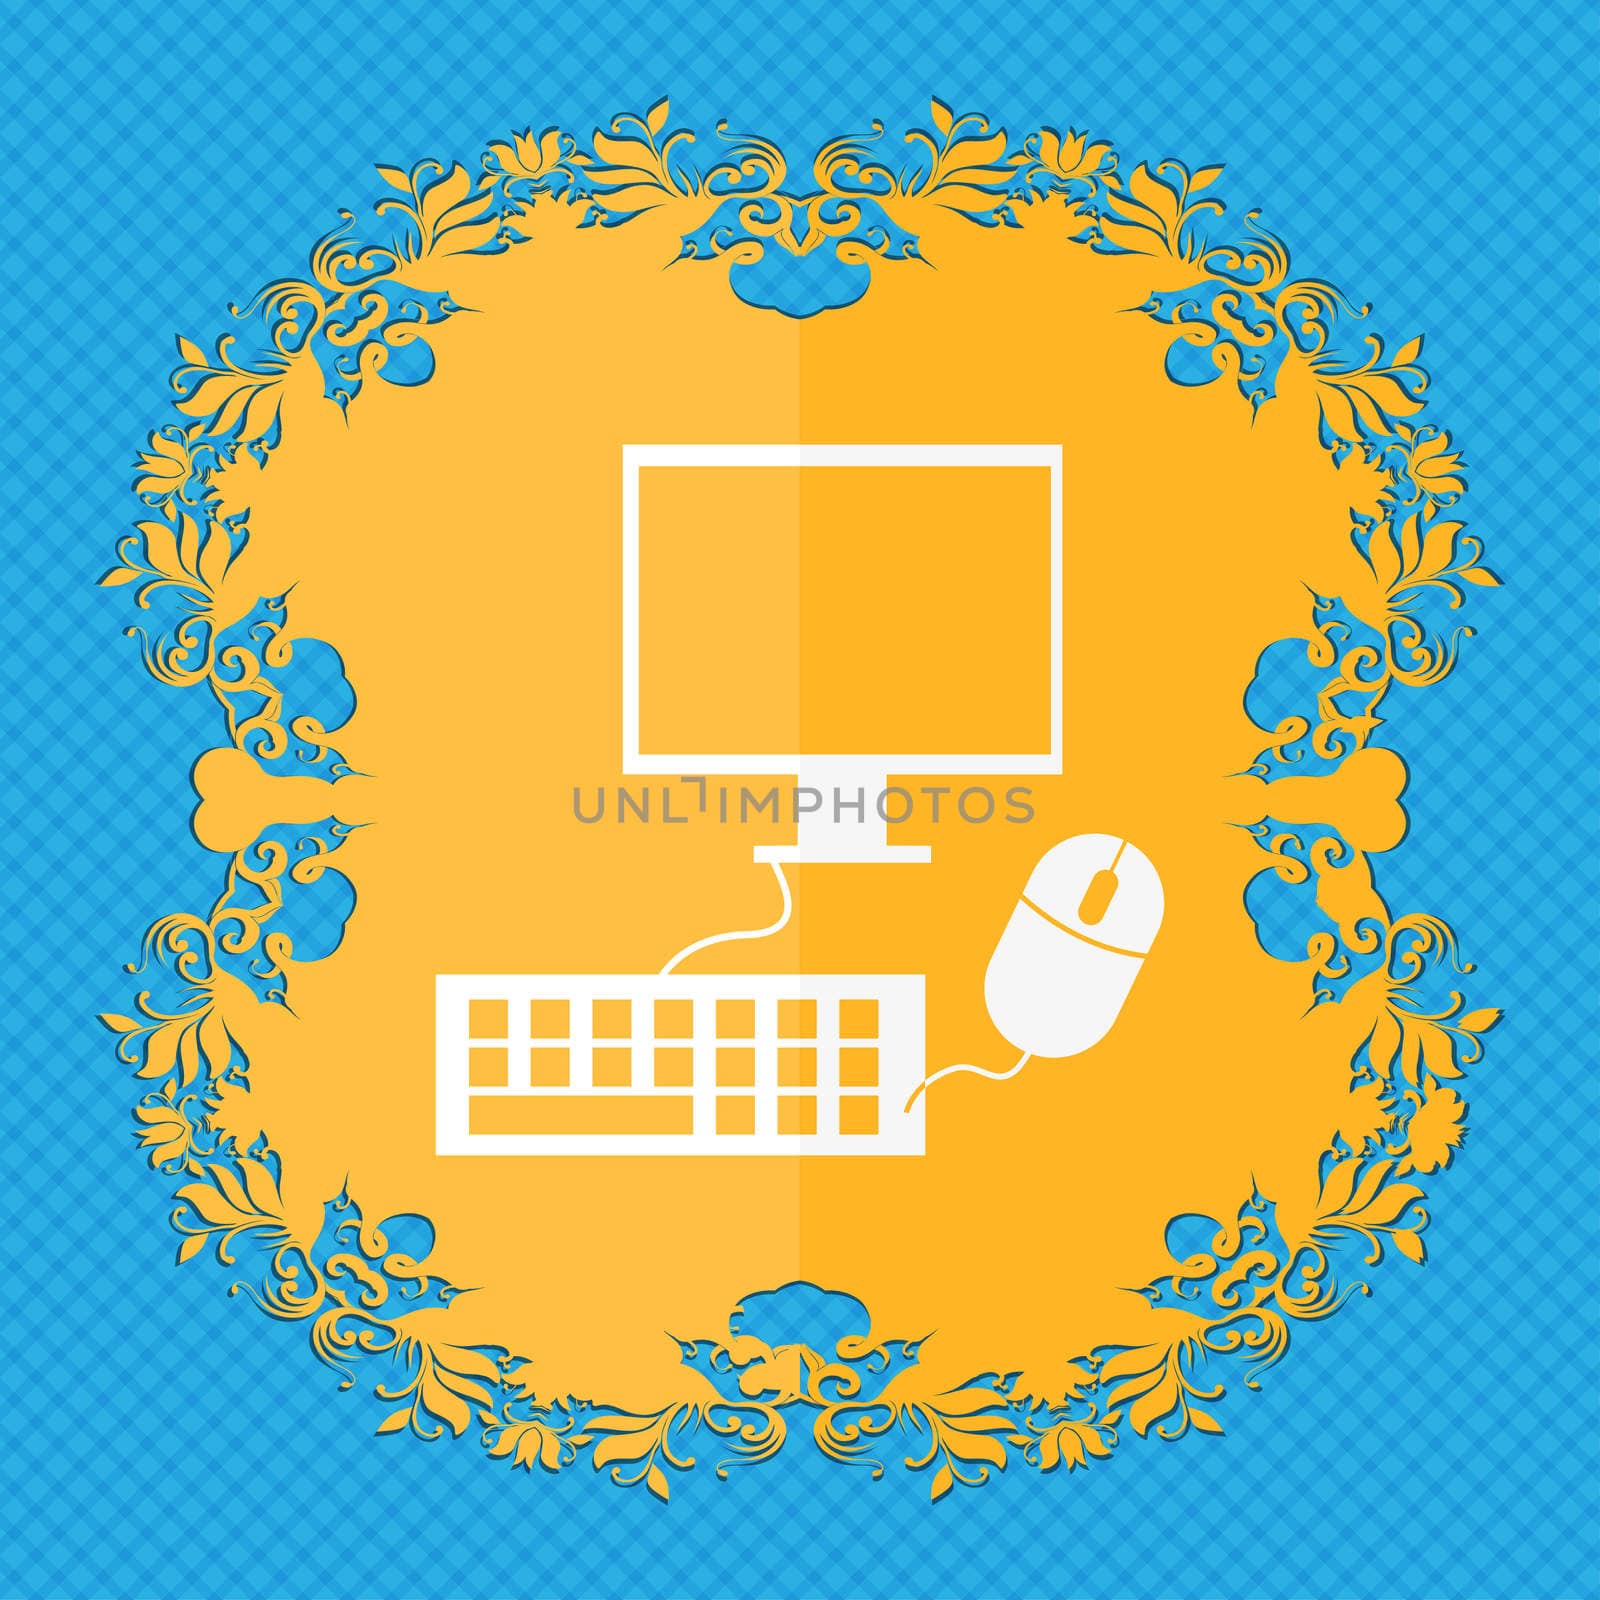 Computer widescreen monitor, keyboard, mouse sign icon. Floral flat design on a blue abstract background with place for your text.  by serhii_lohvyniuk